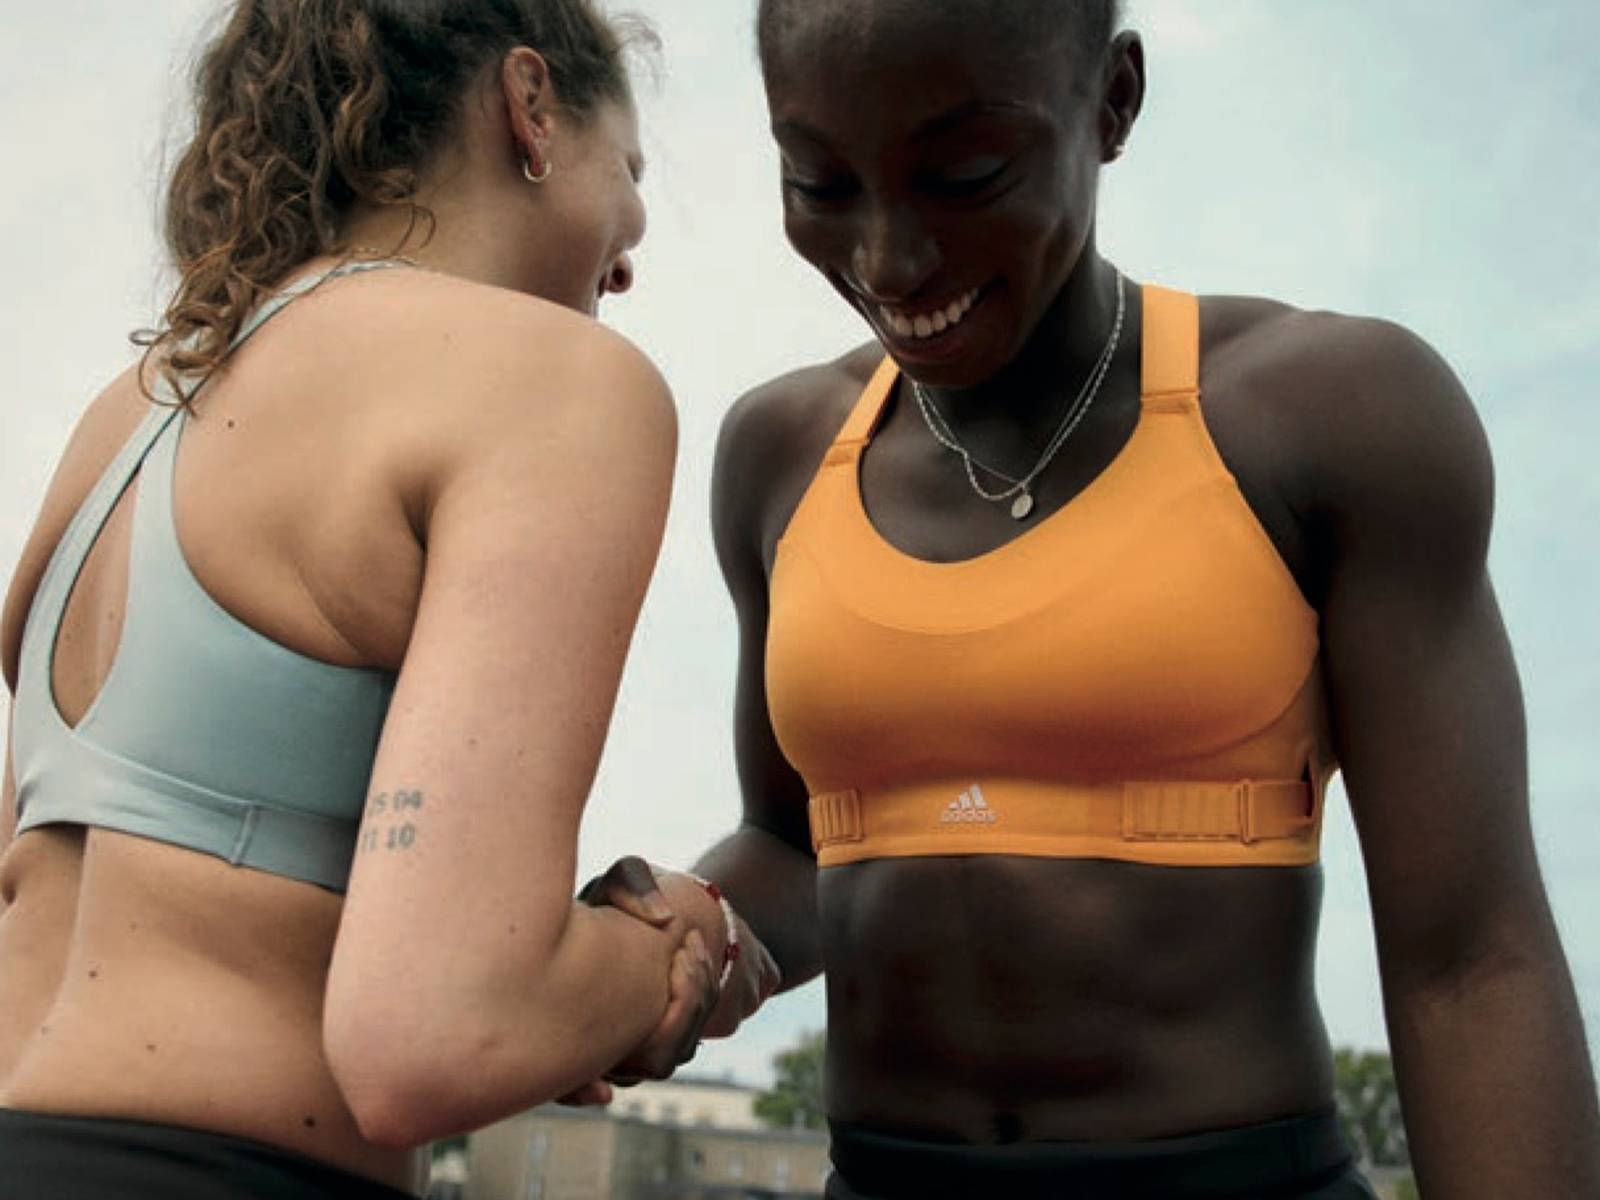 adidas' Breast Gallery Features Bare Breasts to Launch New